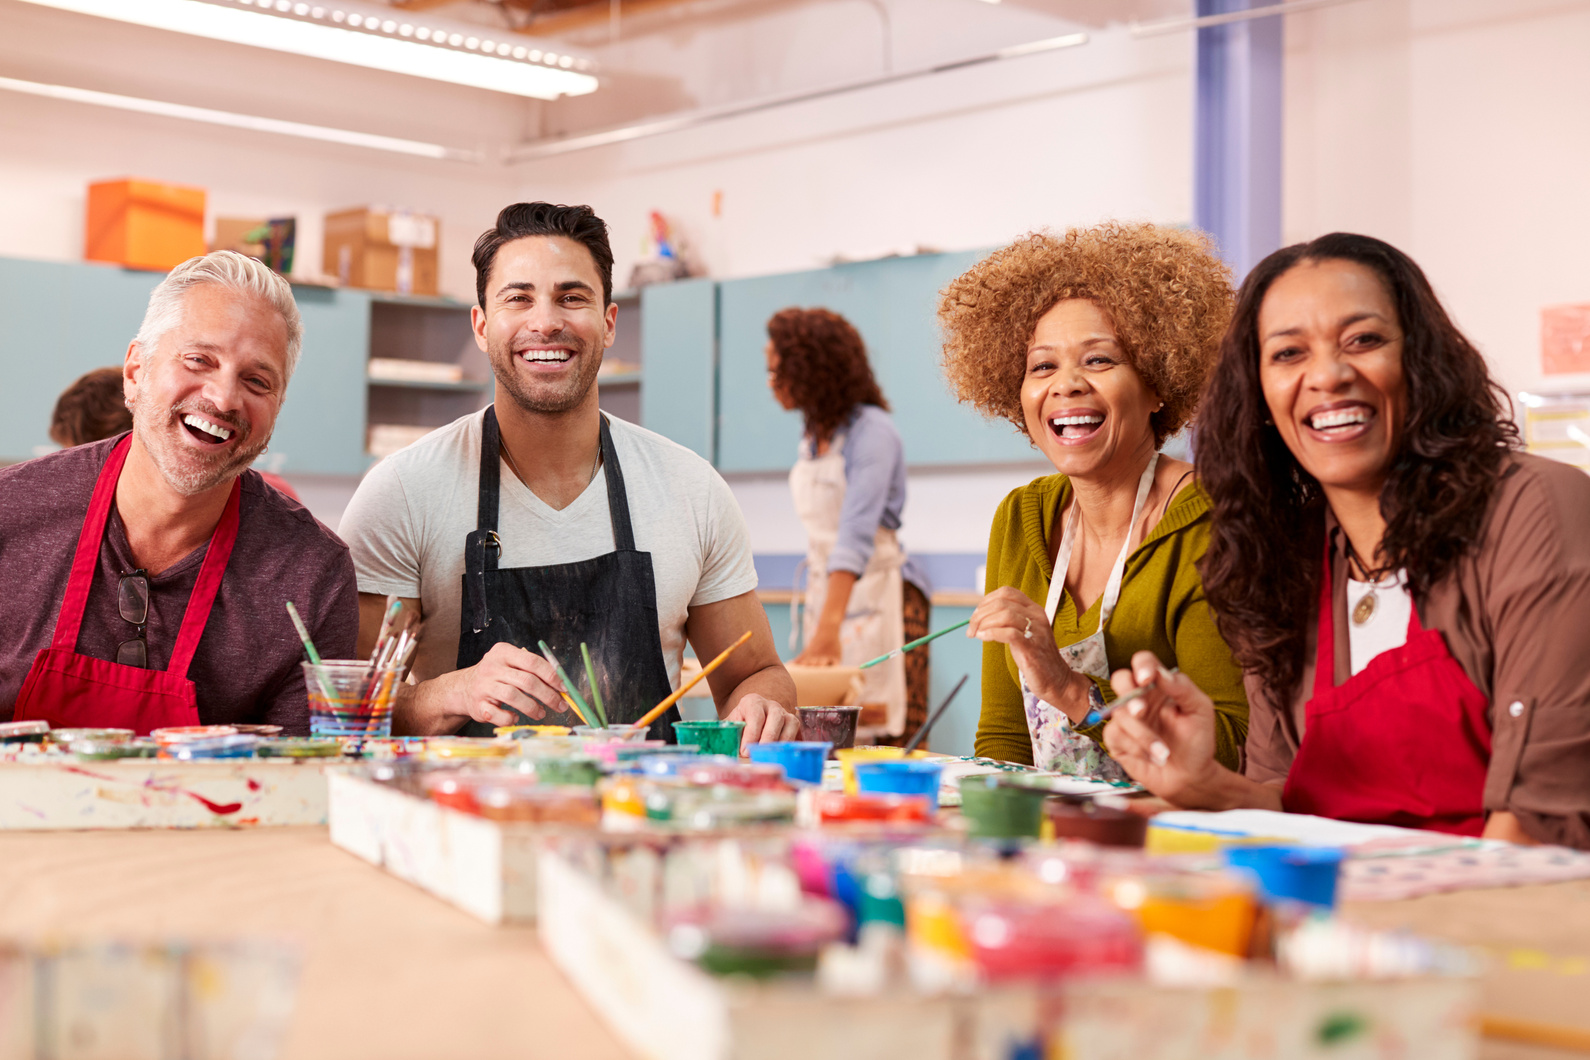 a group of people sitting at a table with paintbrushes in front of them